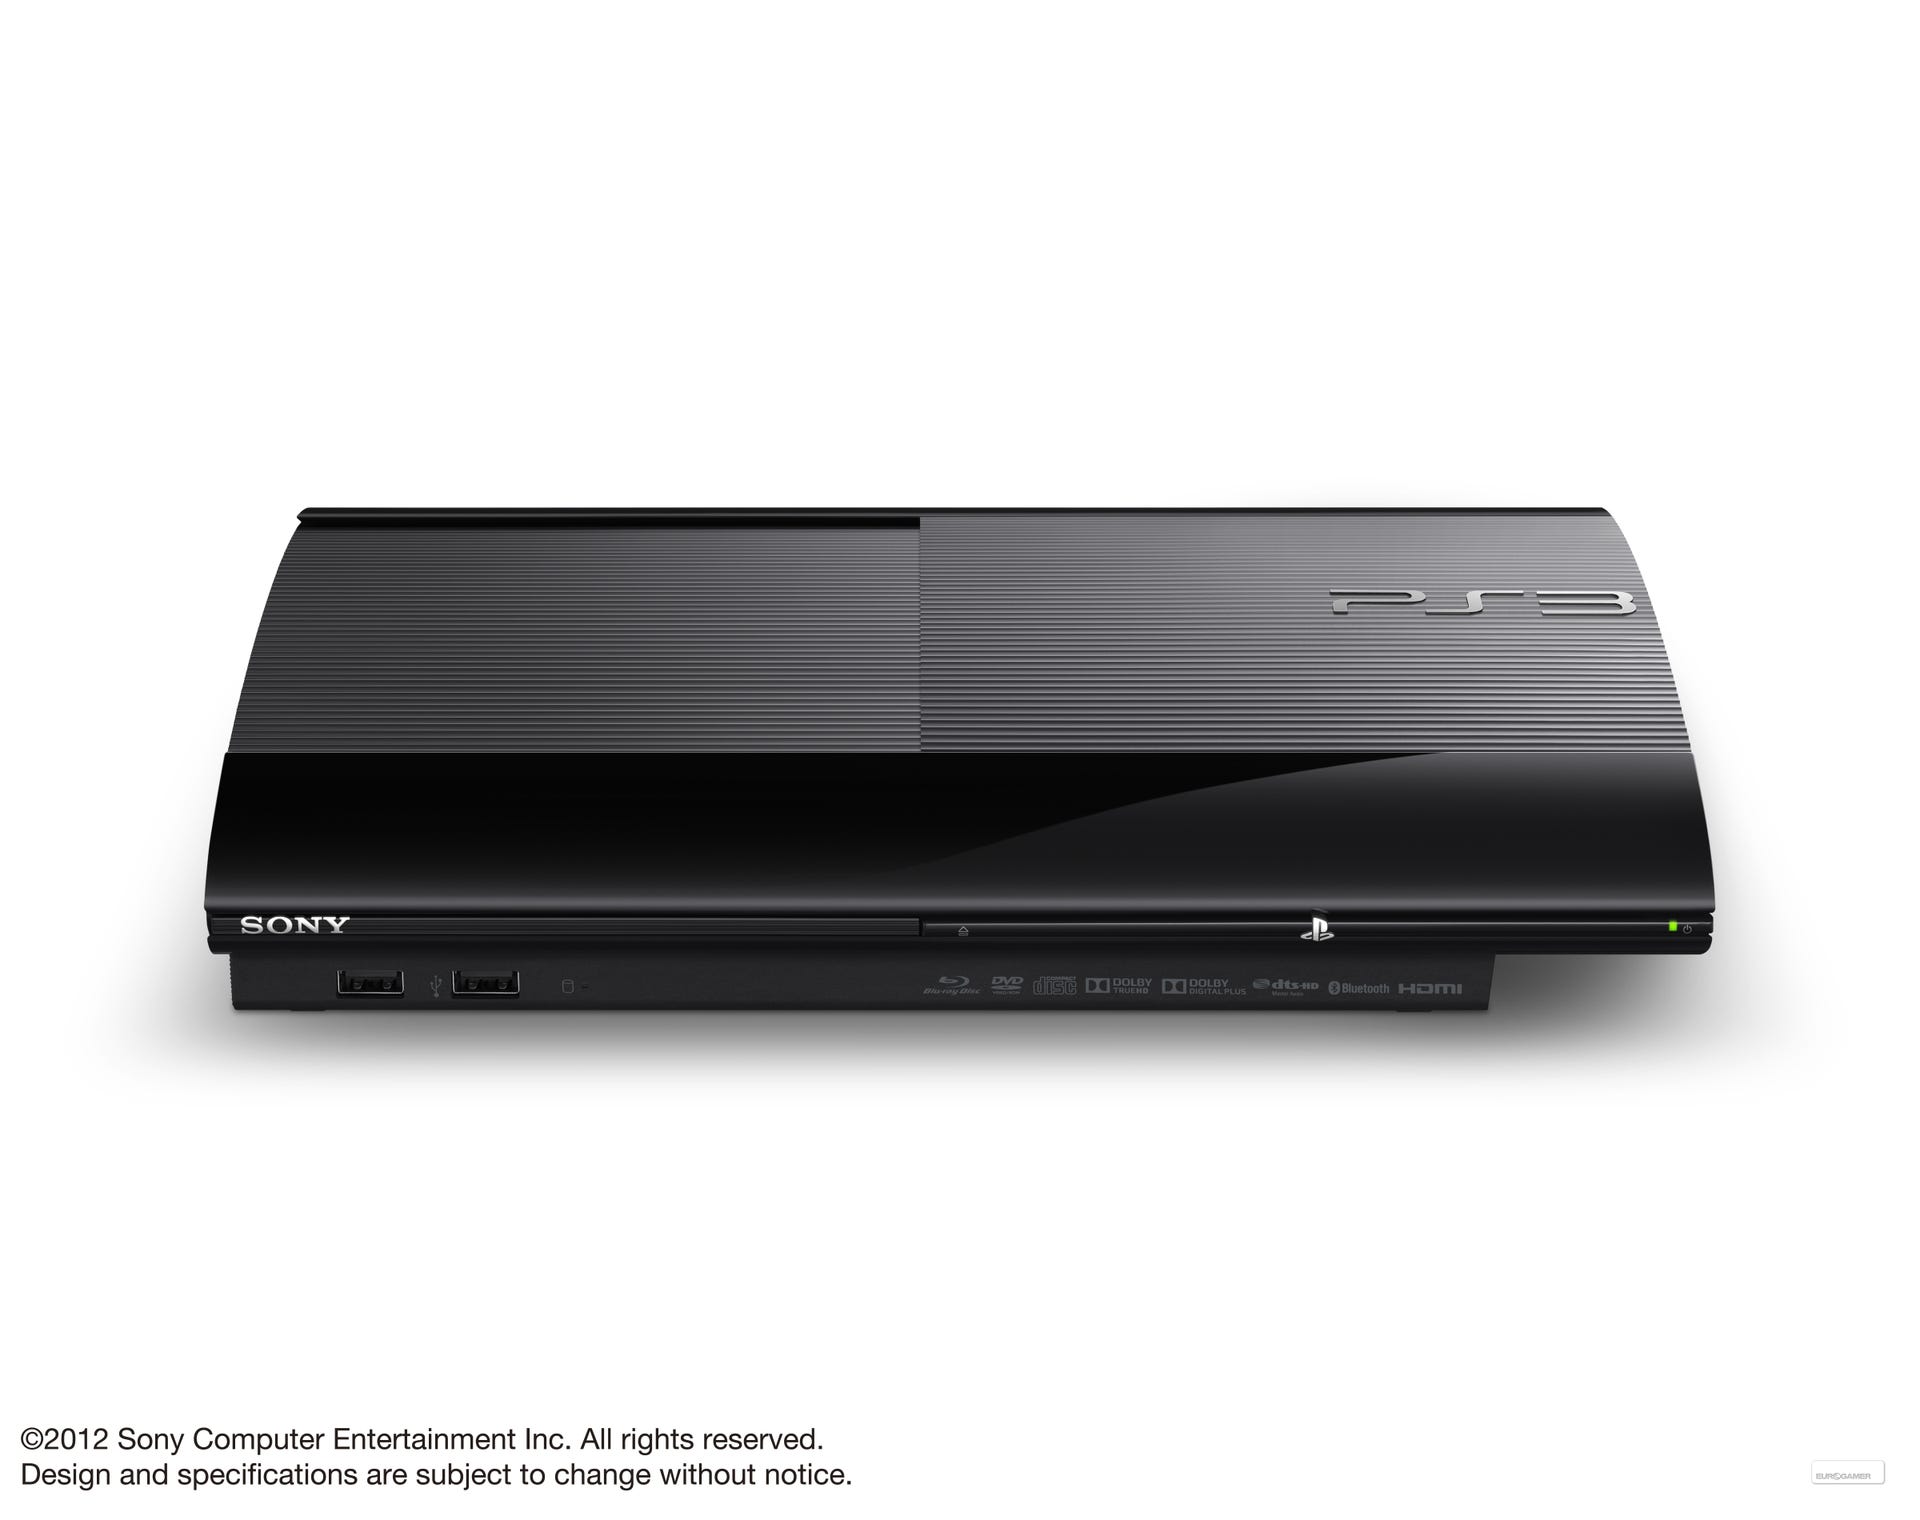 Foundry goes hands-on with the super-slim PS3 |